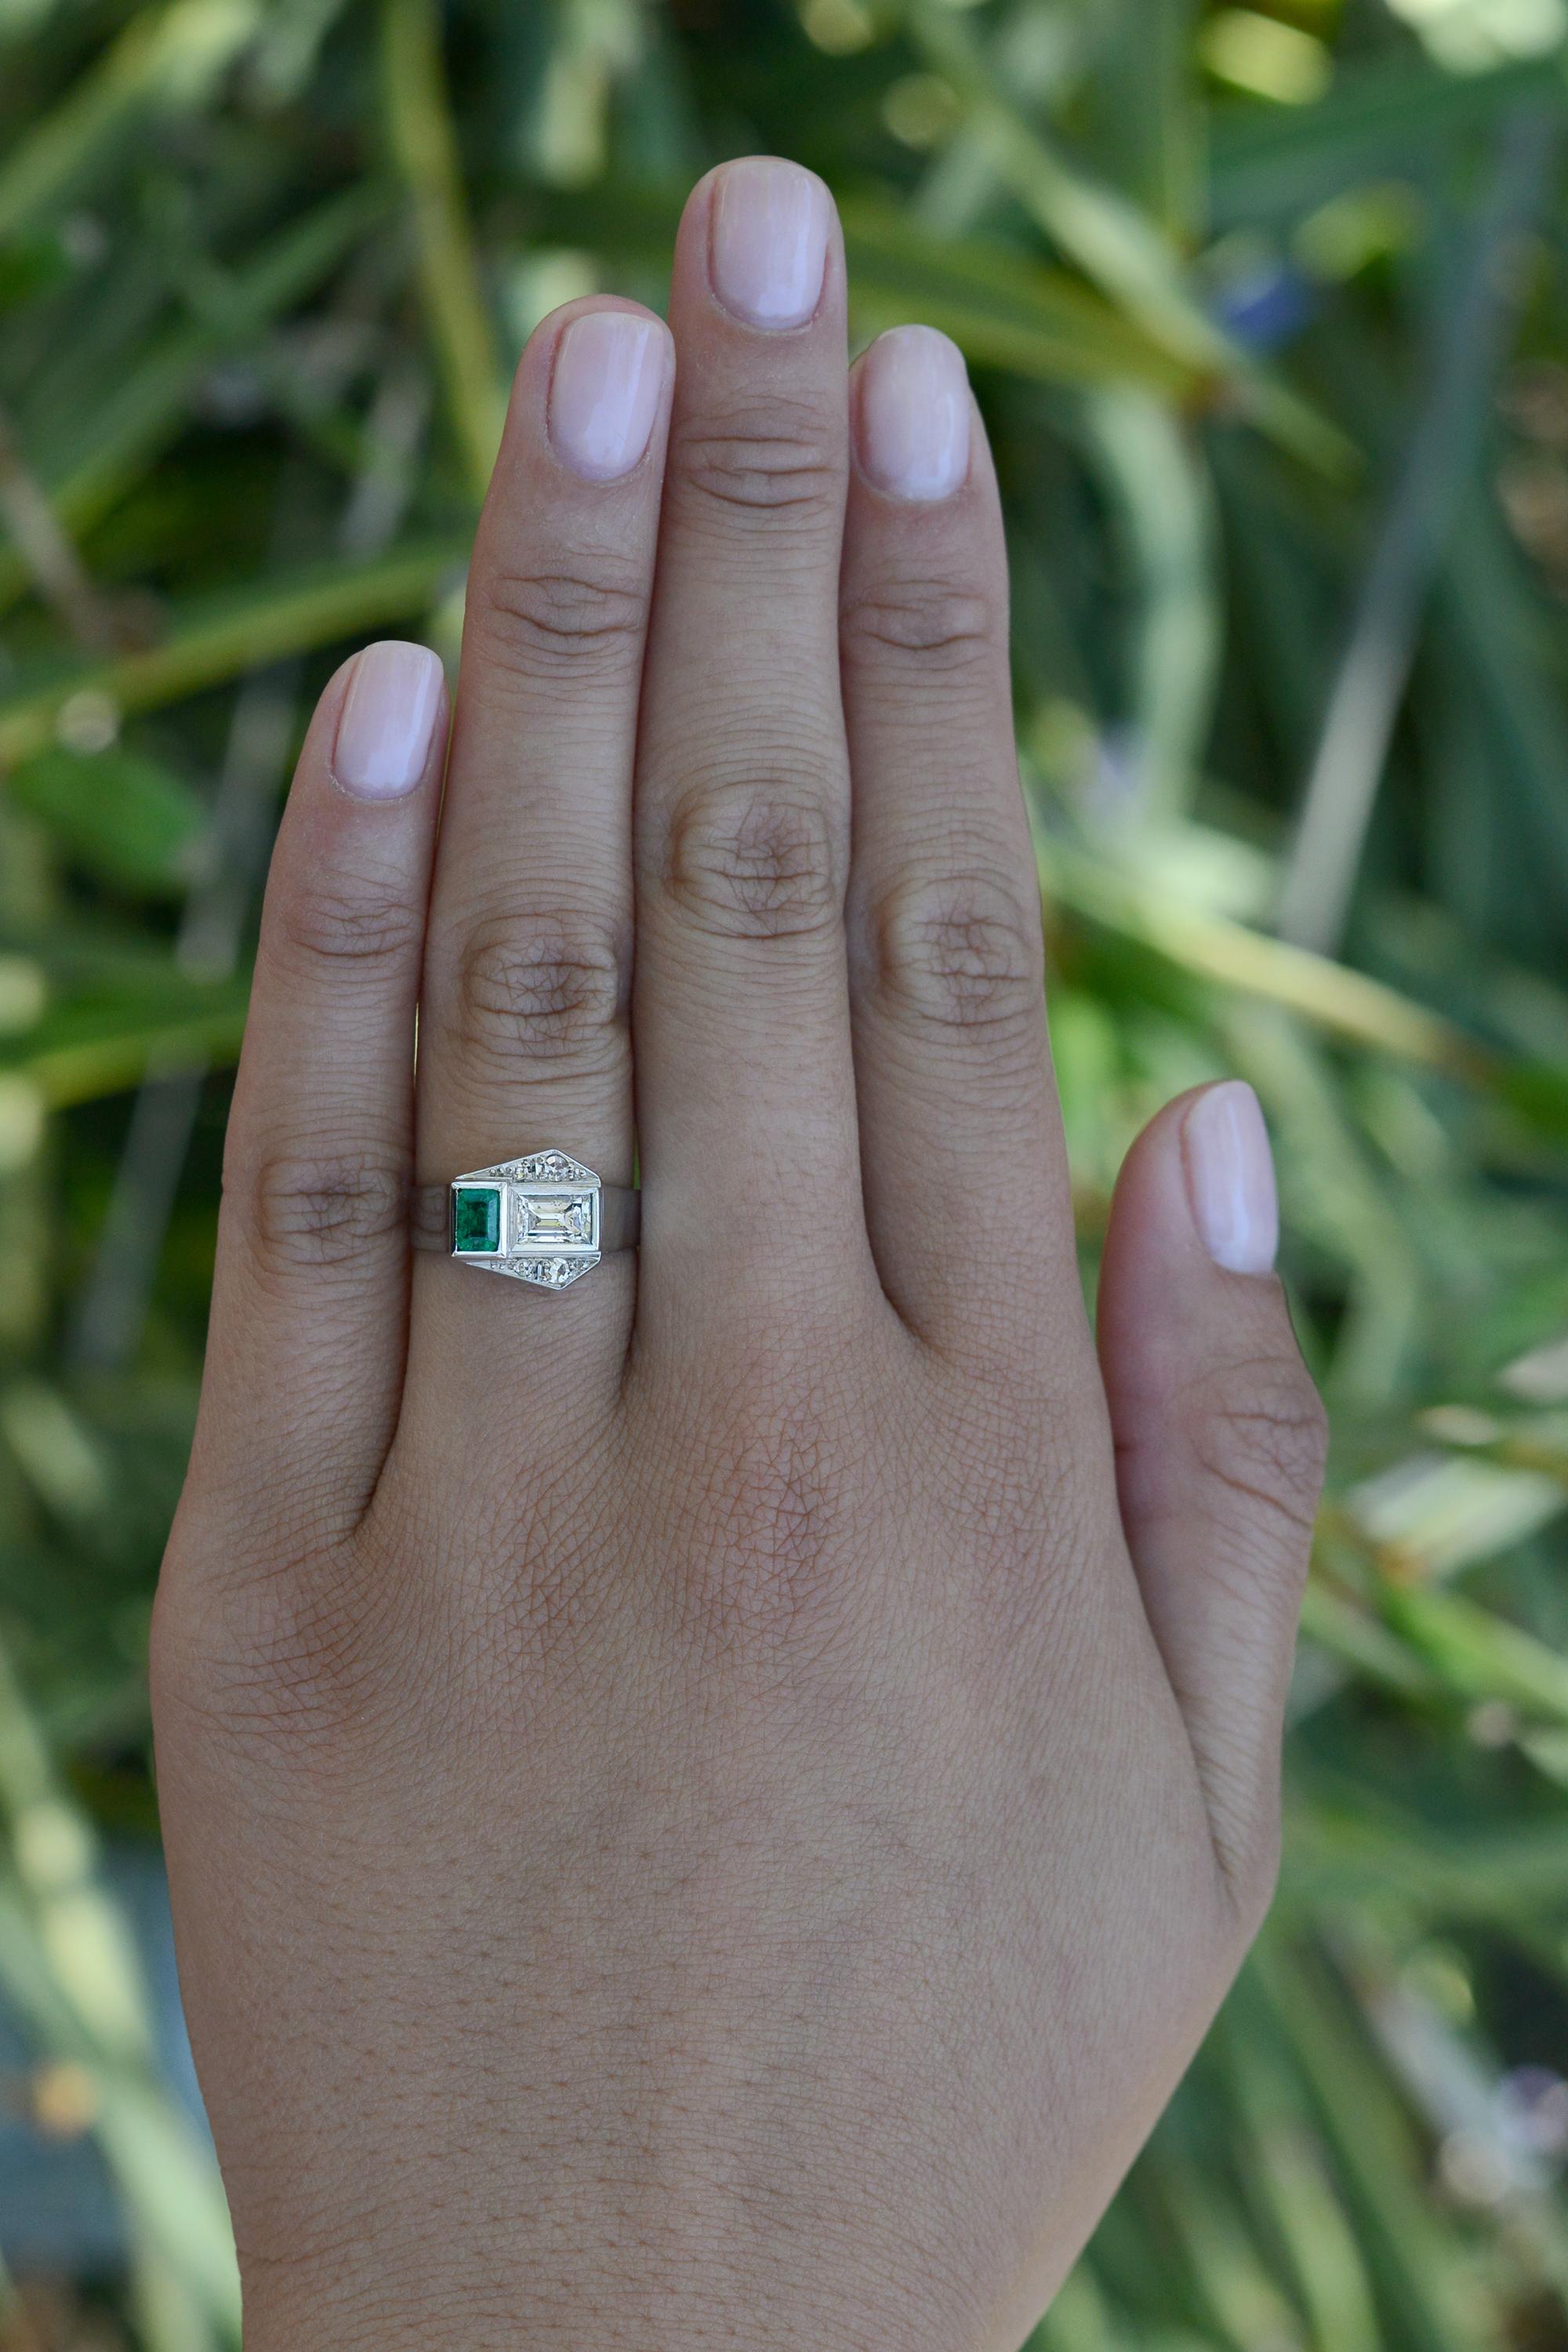 Lovely and unique, this Art Deco 2 stone engagement ring captivates with its rich aesthetic design, showcasing authentic 1920s Art Deco geometry. Featuring an intriguing composition of a sparkling emerald cut diamond and vibrant emerald that